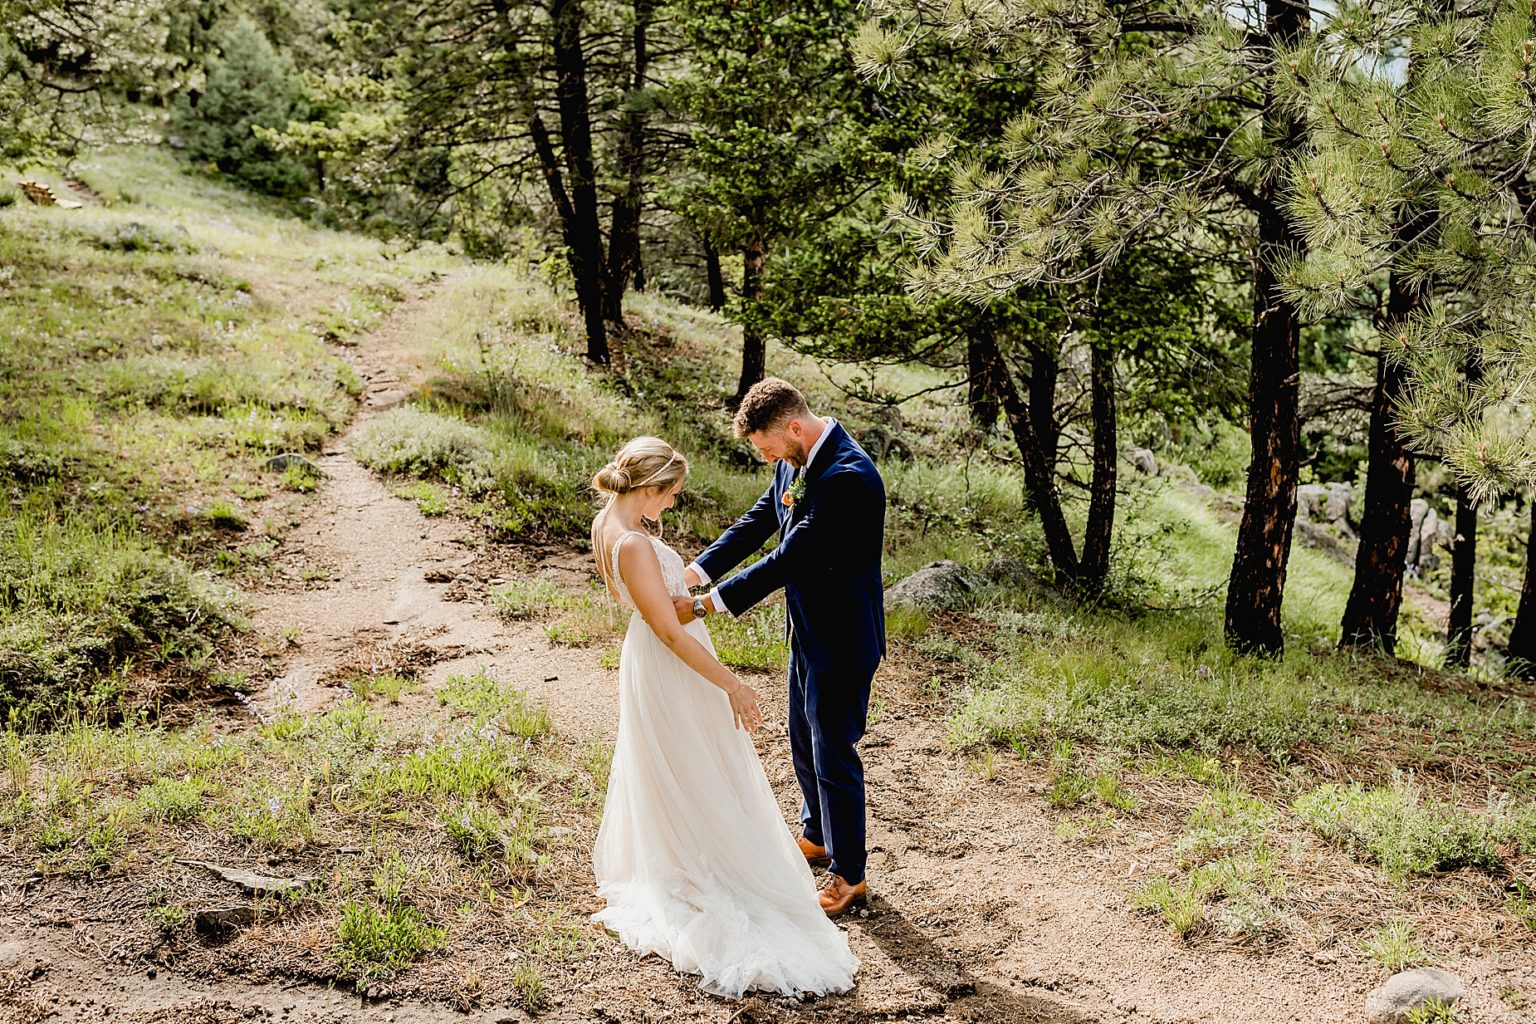 bride and groom embrace each other after their first look on wedding day in the trees of colorado